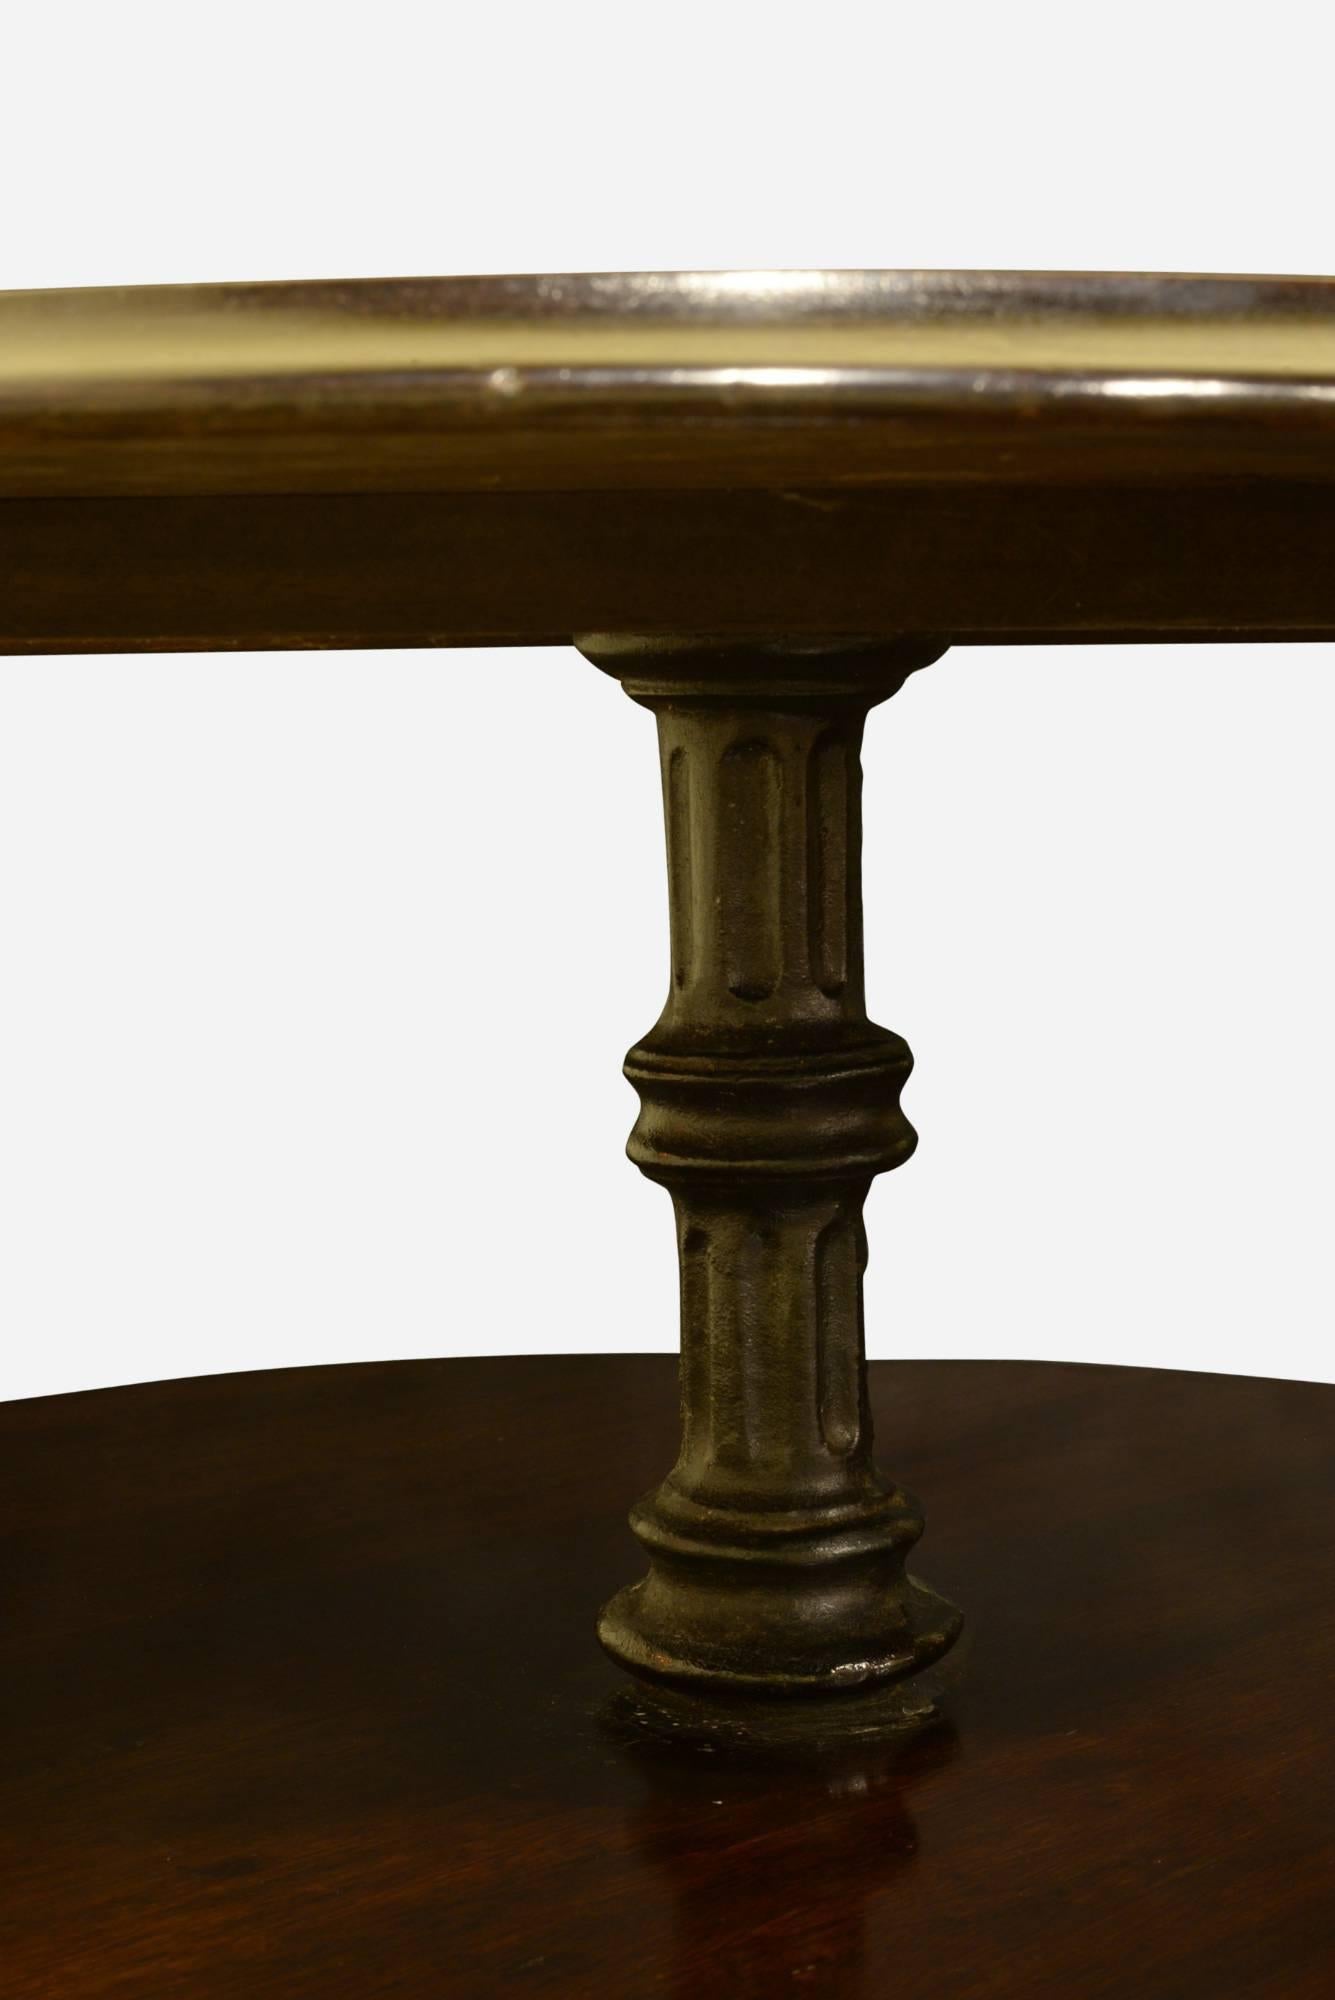 A two-tier mahogany pub table with cast iron base,

circa 1900.
 